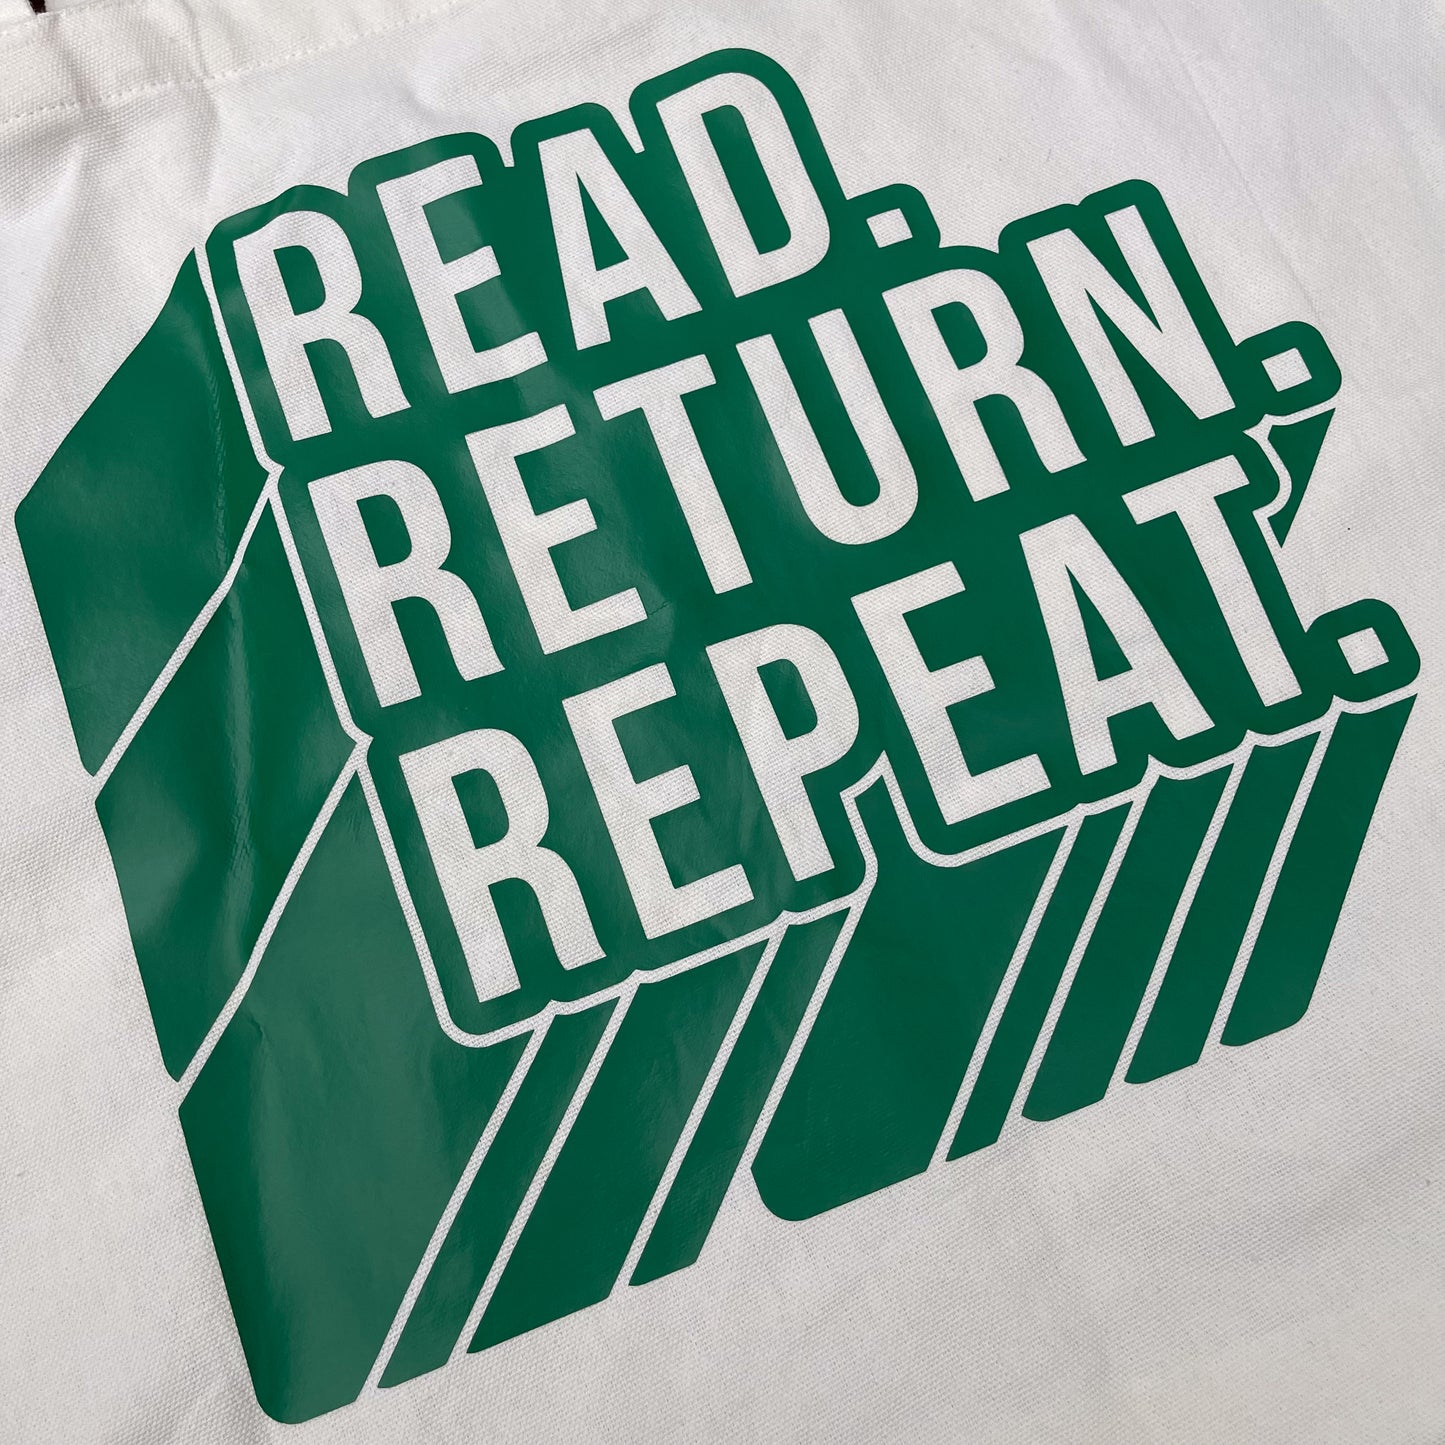 Hand Printed Canvas Tote - "Read Return Repeat"